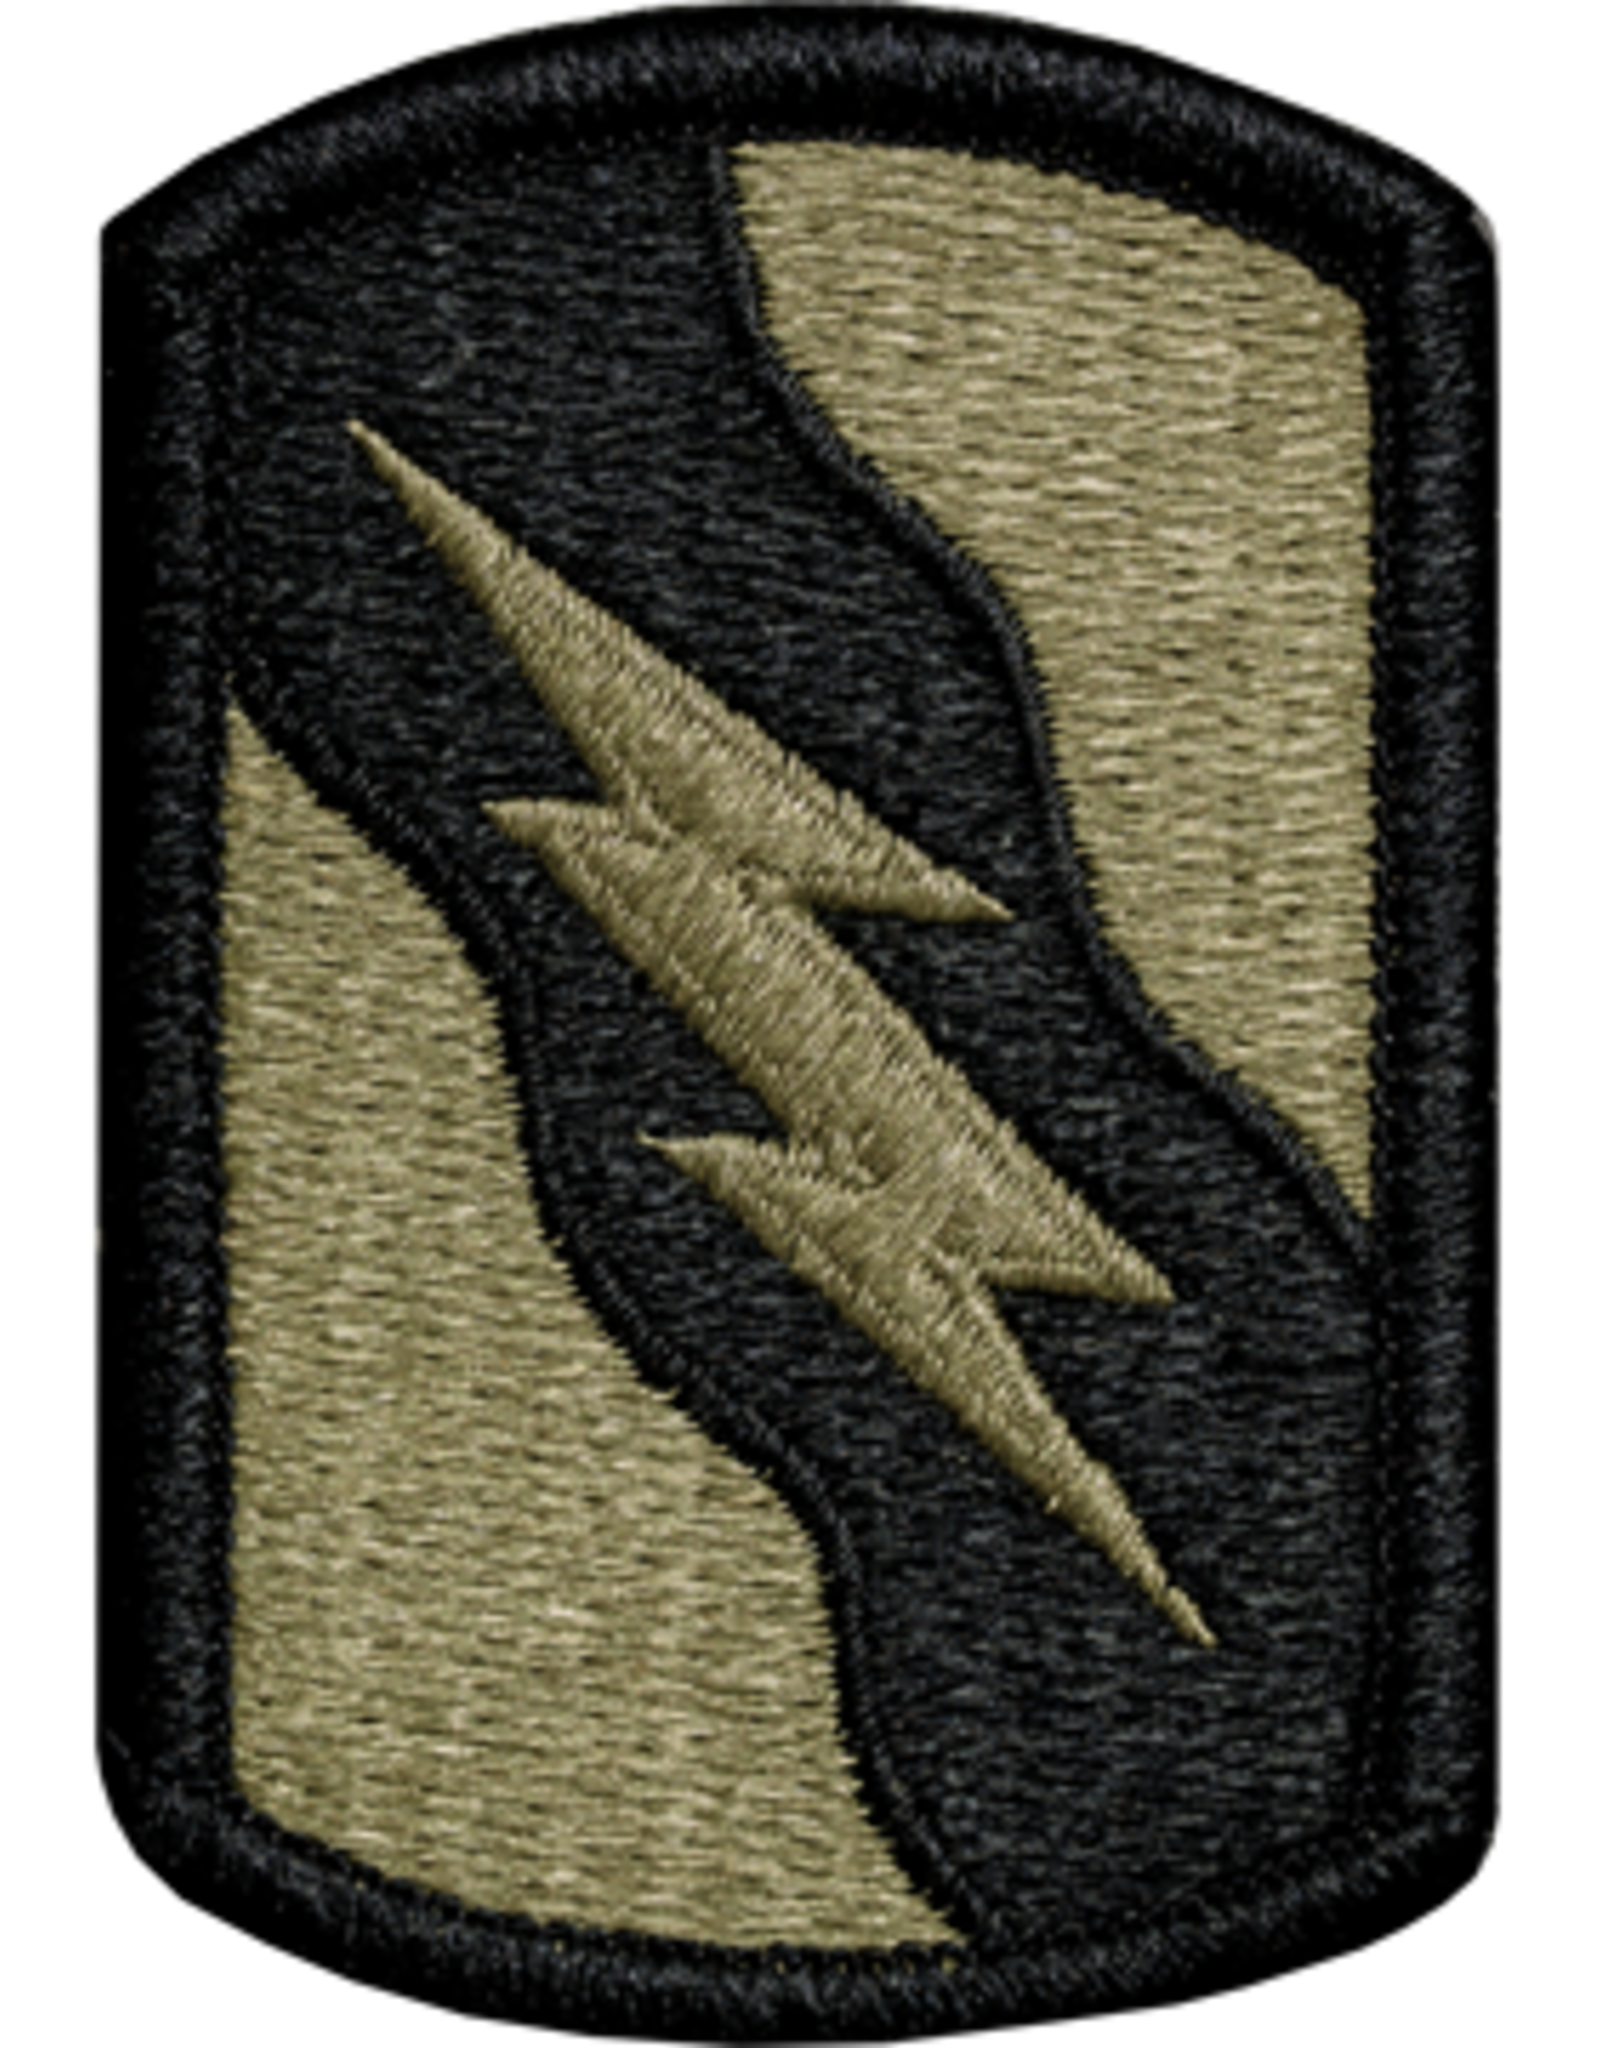 155th Armor Patch